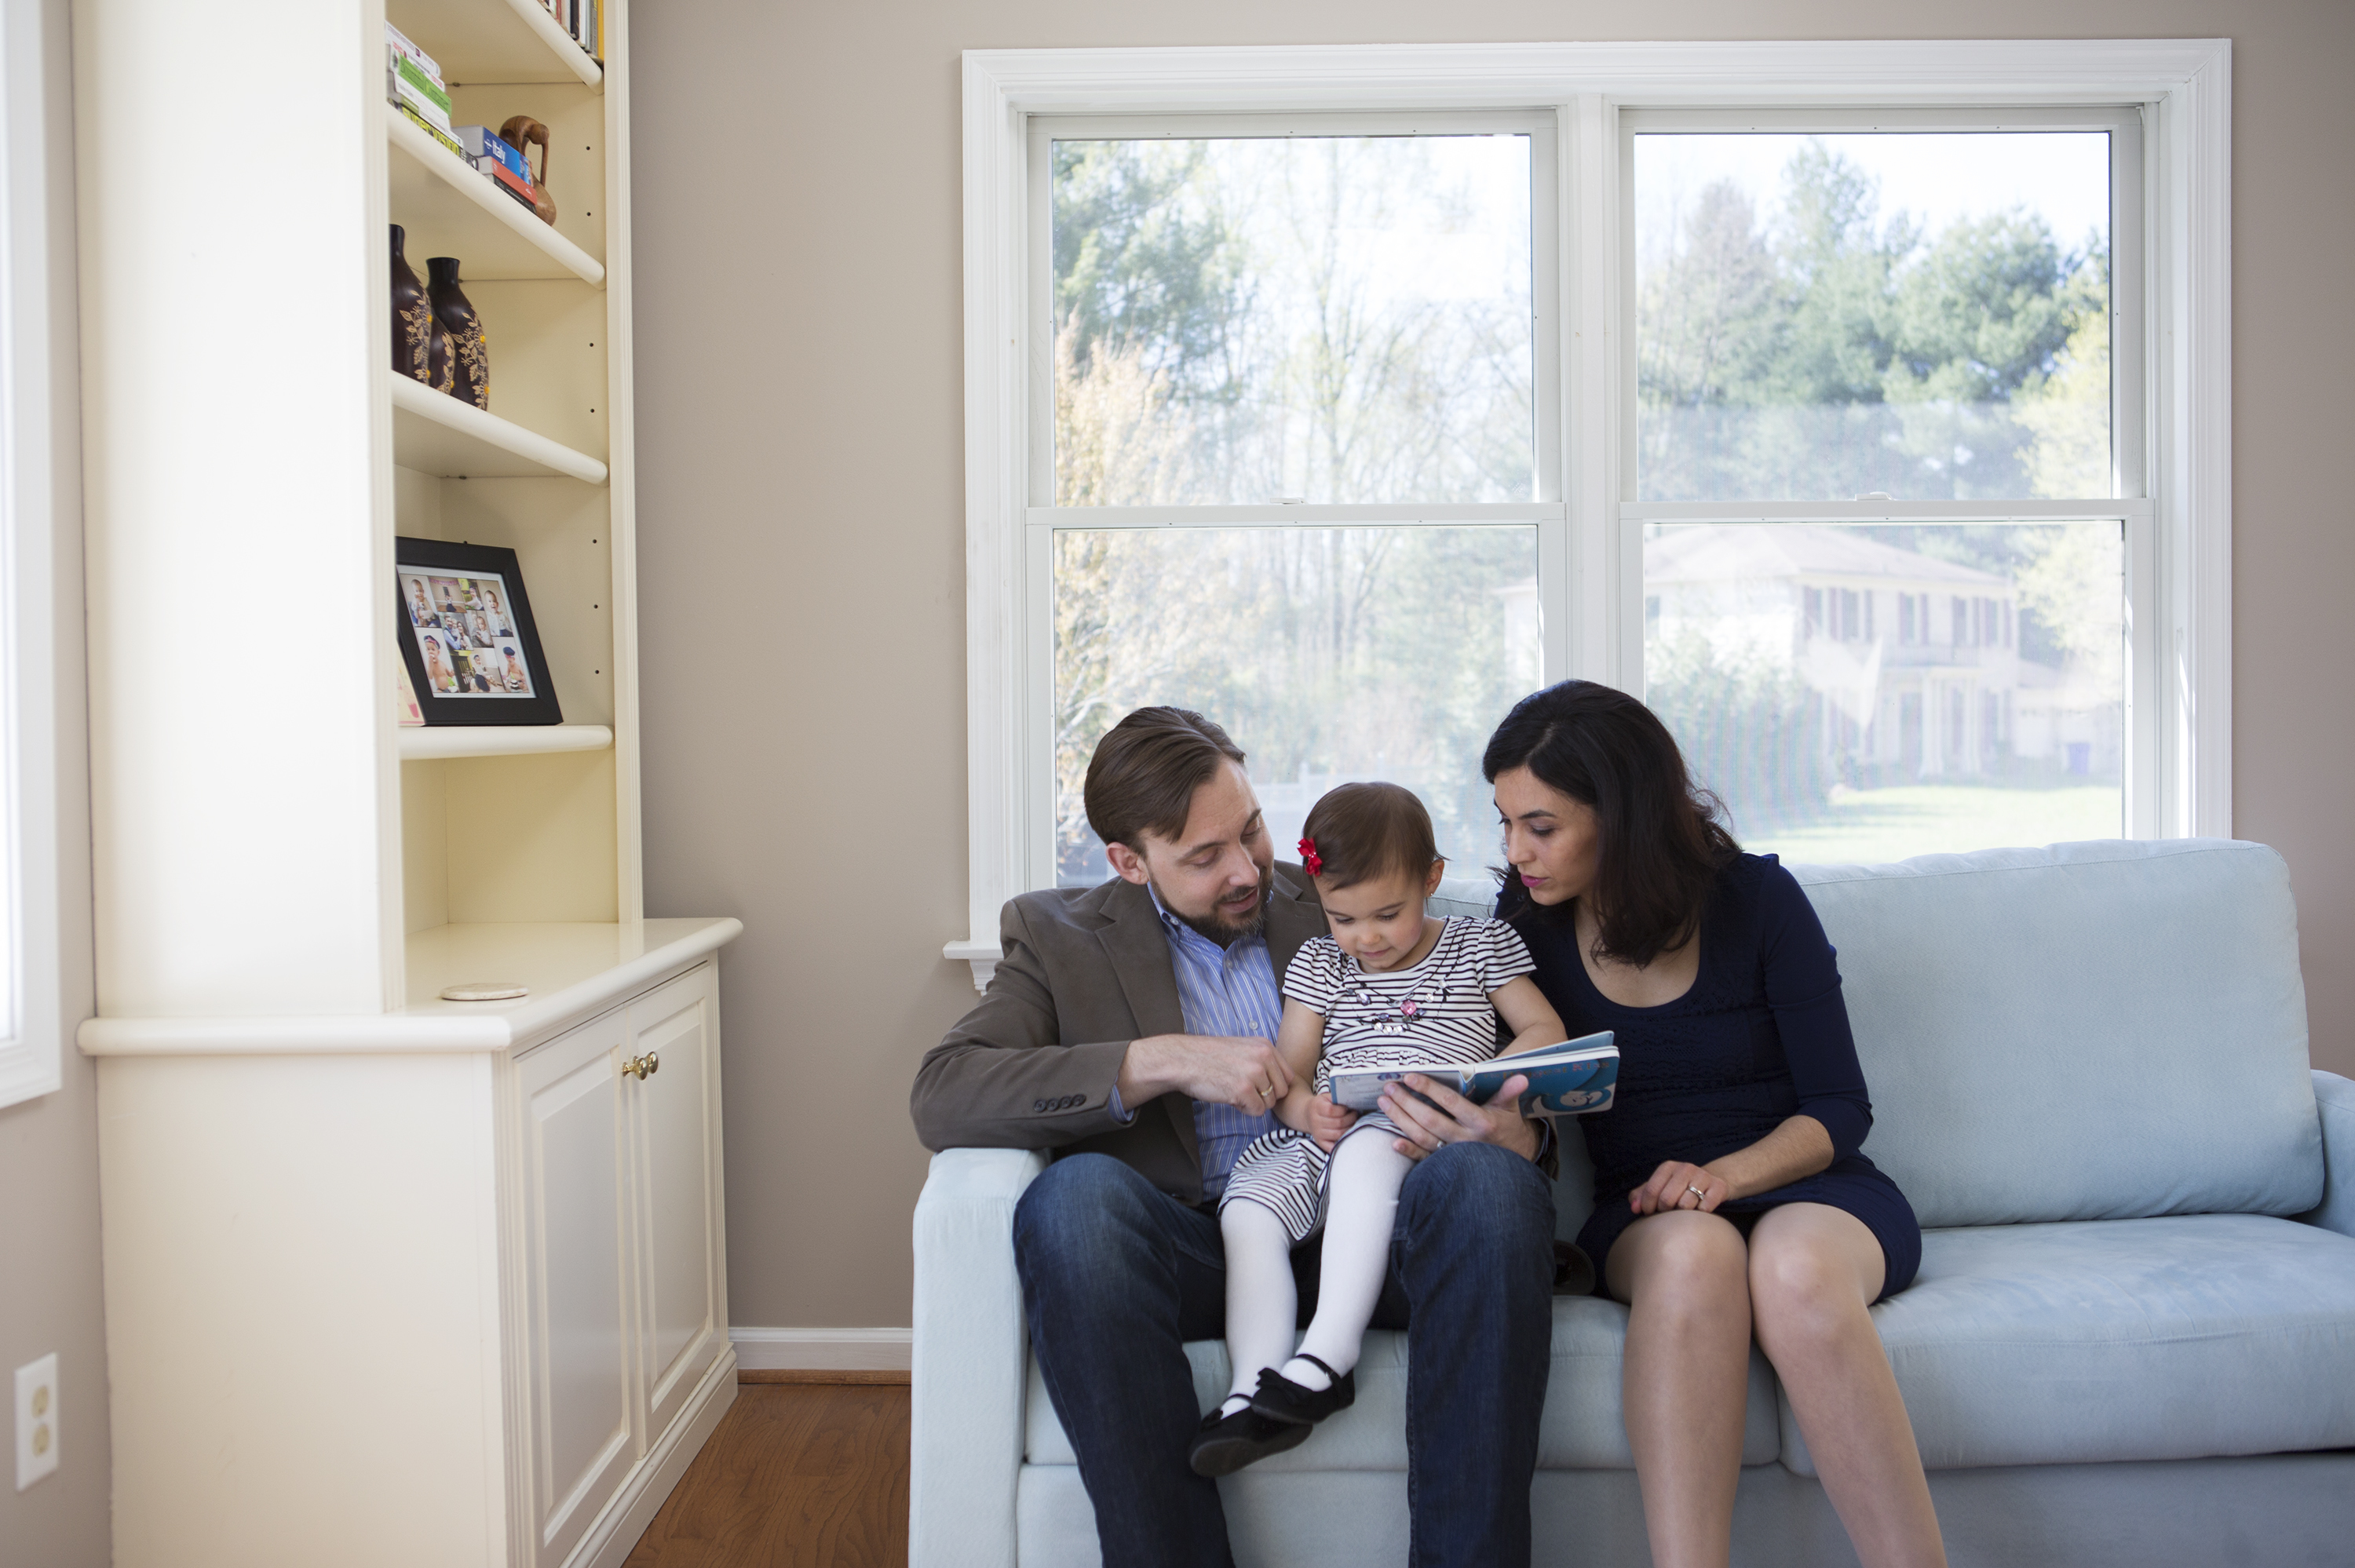 Travis and Sadiye Rieder read a book with their 2-year-old daughter, Sinem, in their Maryland home. Travis is a philosopher and ethicist who argues against having too many children, for moral and environmental reasons. His wife always wanted to have a big family.